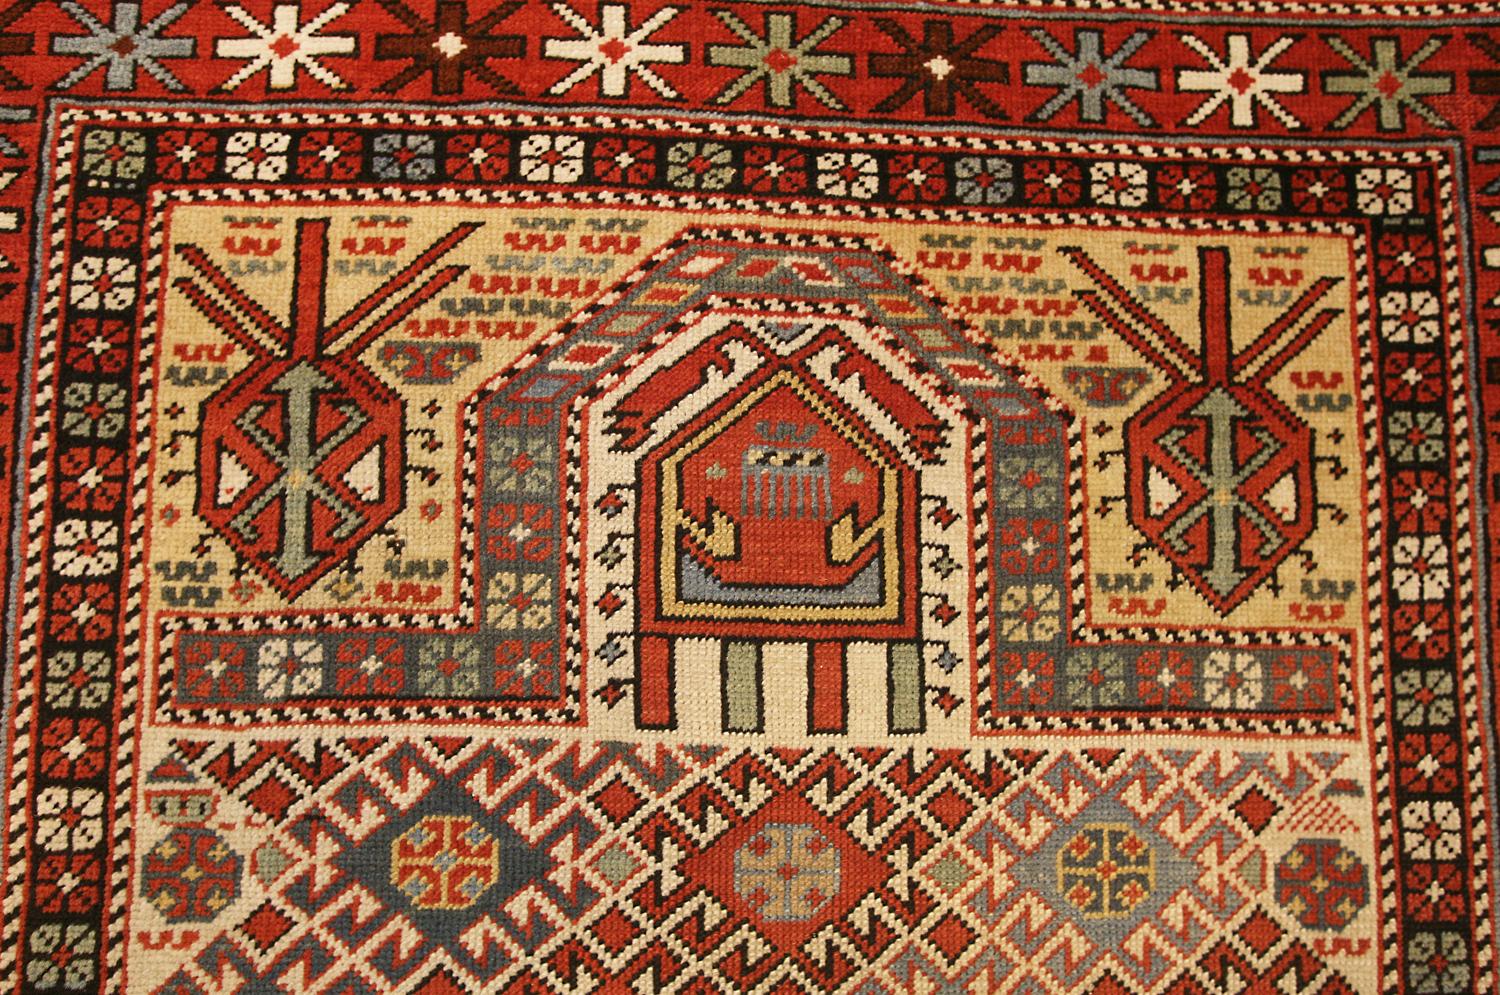 An antique Dagestan prayer rug, Caucasus The ivory field with overall multicolored hold lozenge lattice containing hooks octagonal panels. Mihrab above with stylized hooked panels and small angular bars. In the rust-red border of polychrome panels